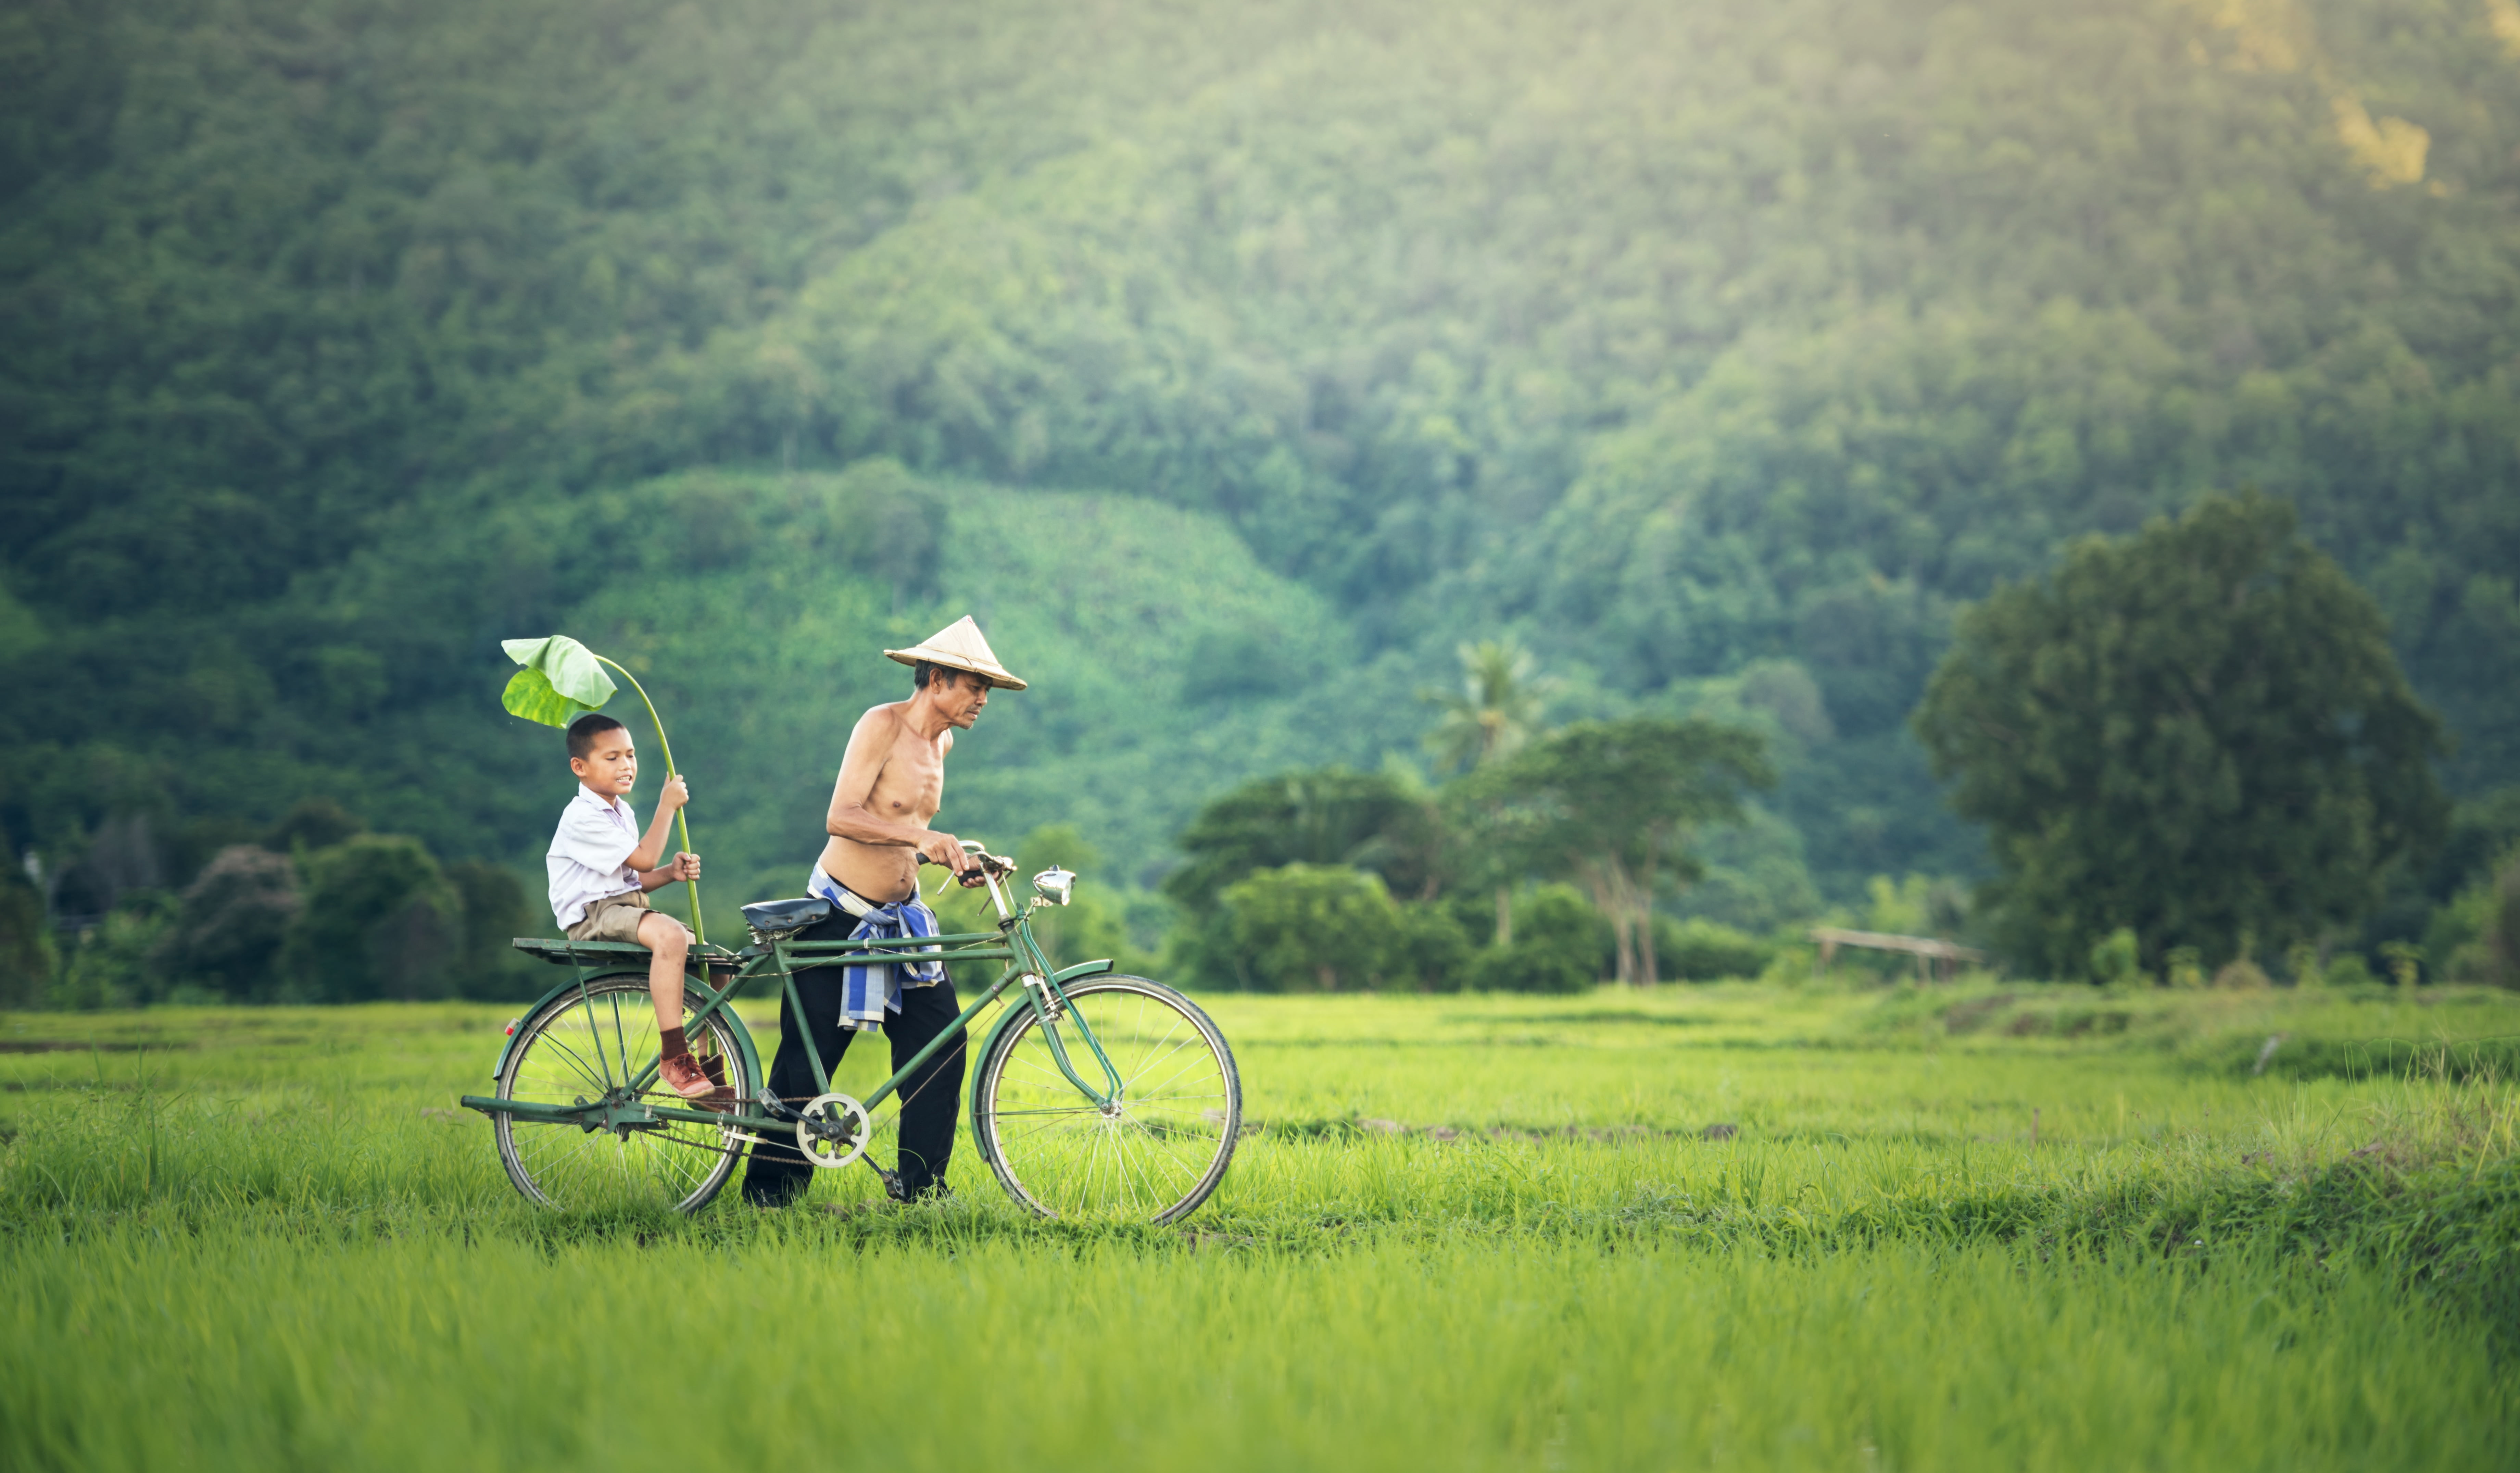 man wearing black pants and round hat pushing the green commuter bike with boy on green grass field near the mountain during daytime